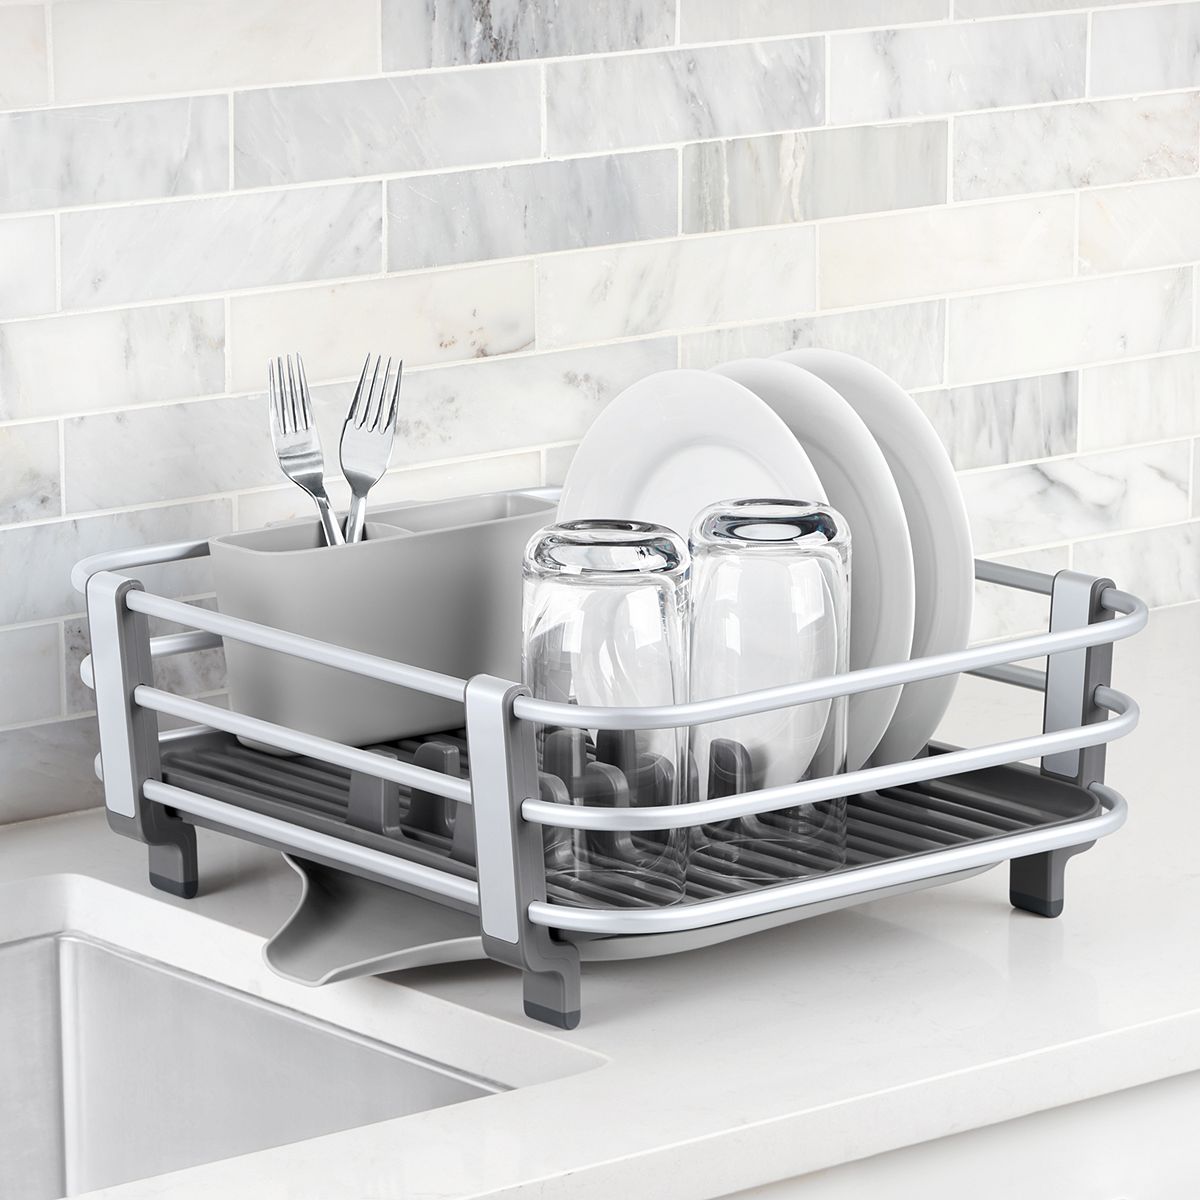 TOOLF Expandable Aluminum Dish Rack, Dish Drainer on Counter with